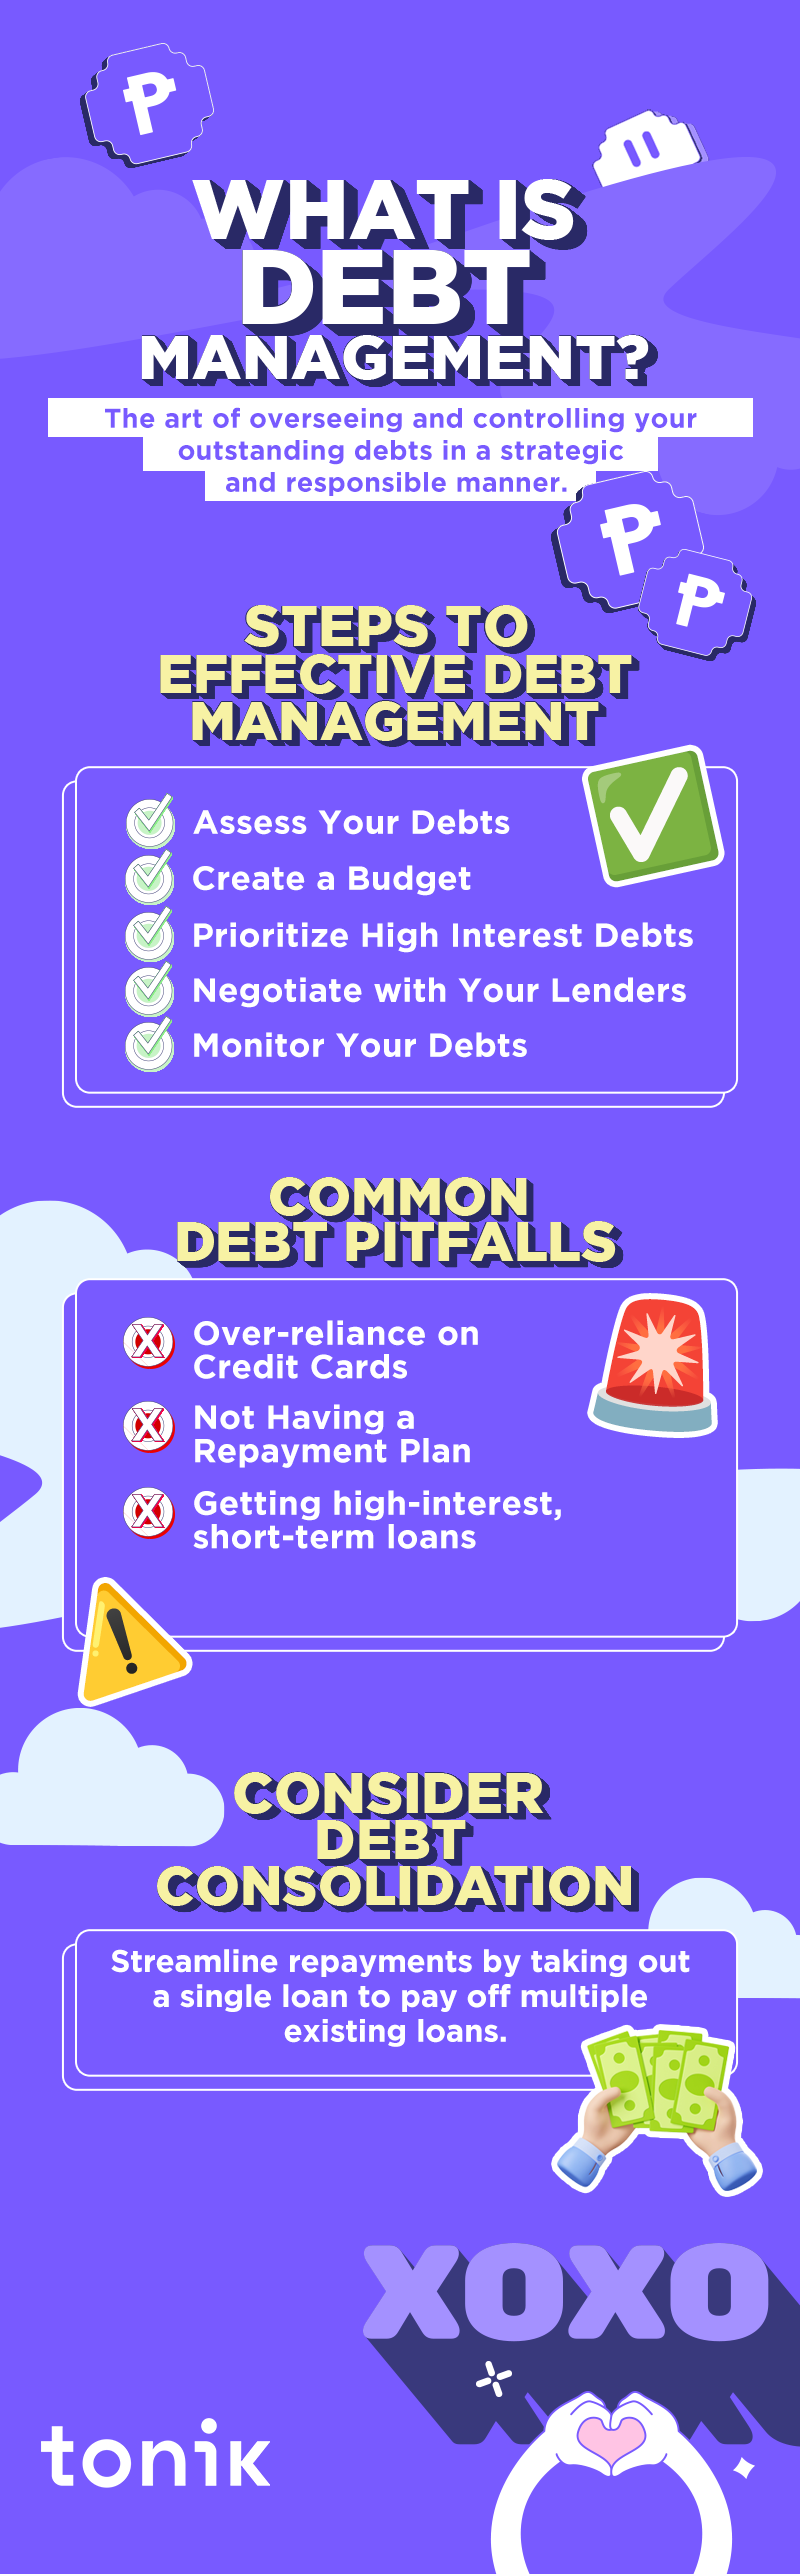 infographic on debt consolidation